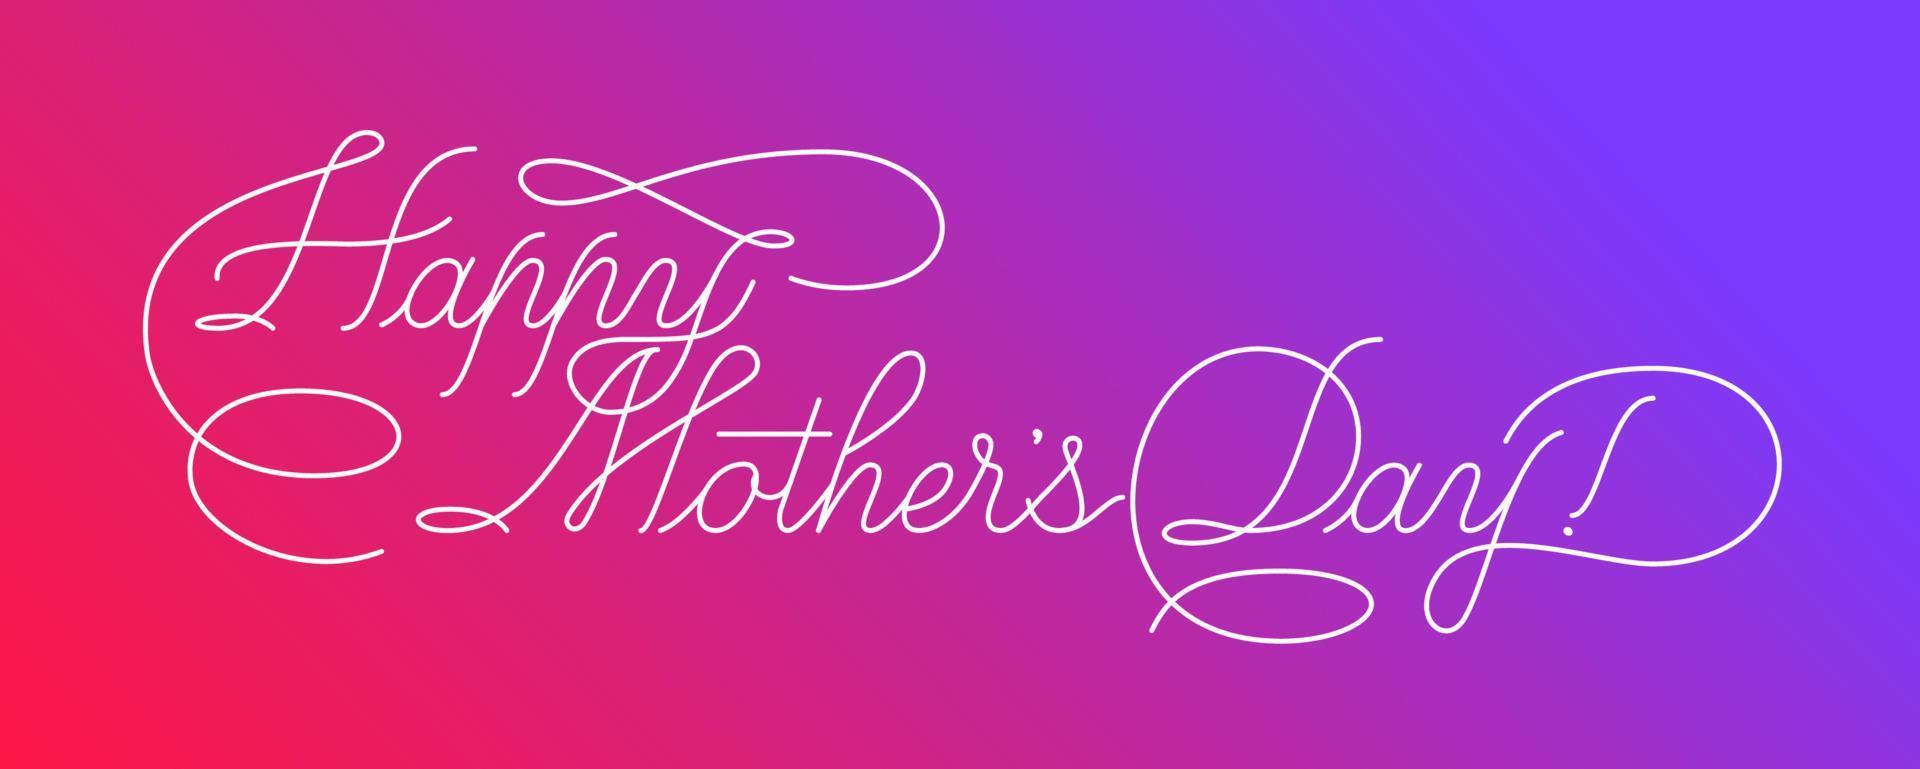 Happy Mothers Day - calligraphic lettering with elegant flourishes. Modern line calligraphy isolated on white background. Vector text in linear style, editable stroke wight.